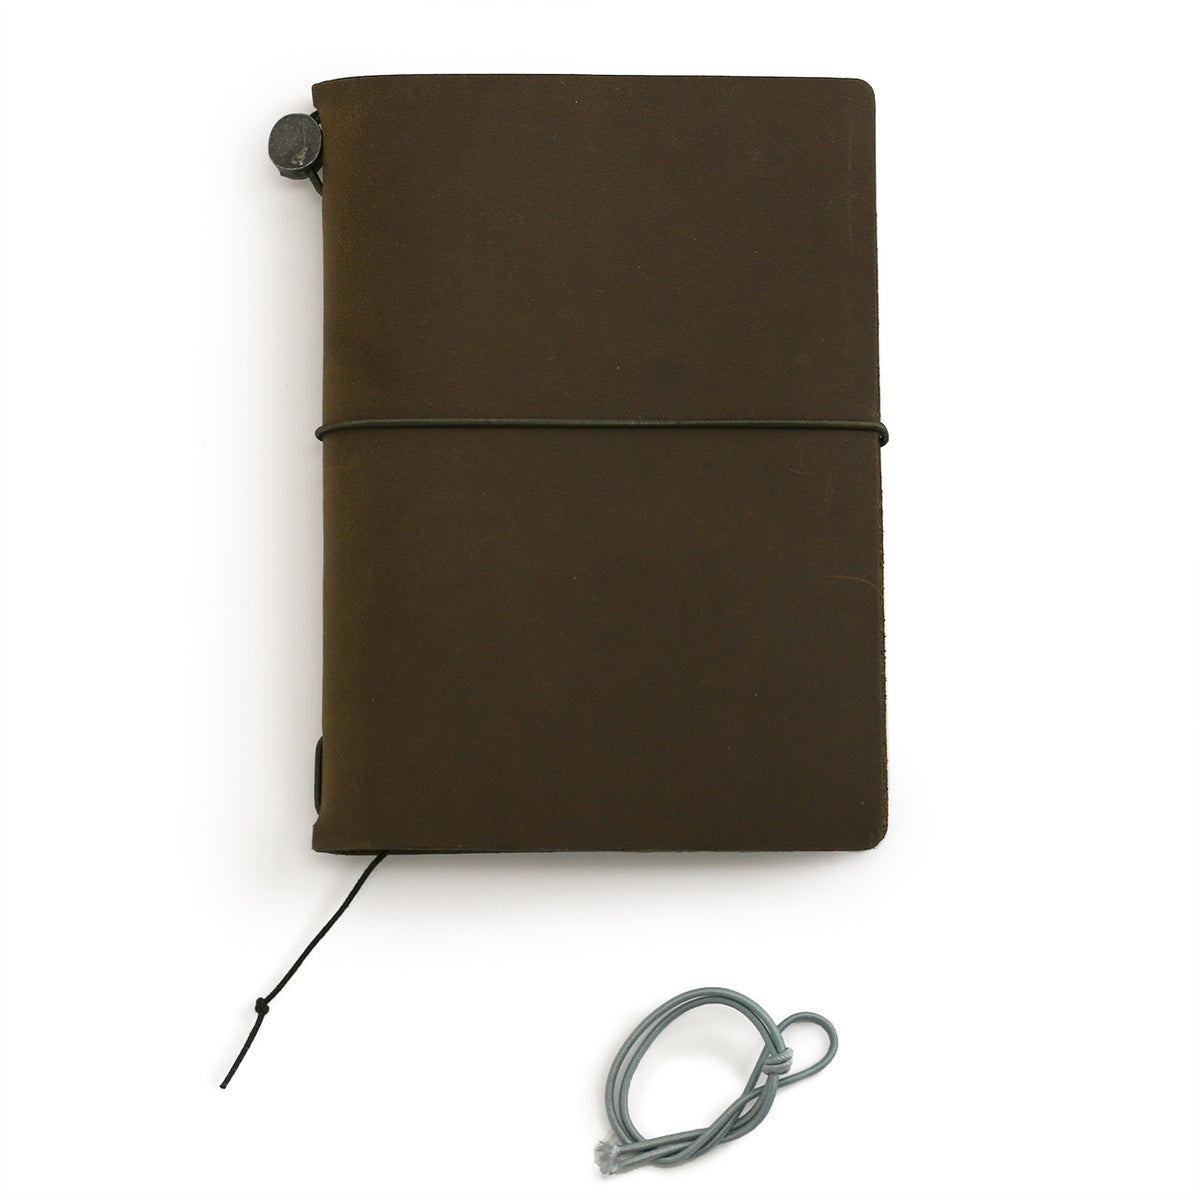 Olive coloured leather notebook cover in passport size wih eexyra light blue elastic